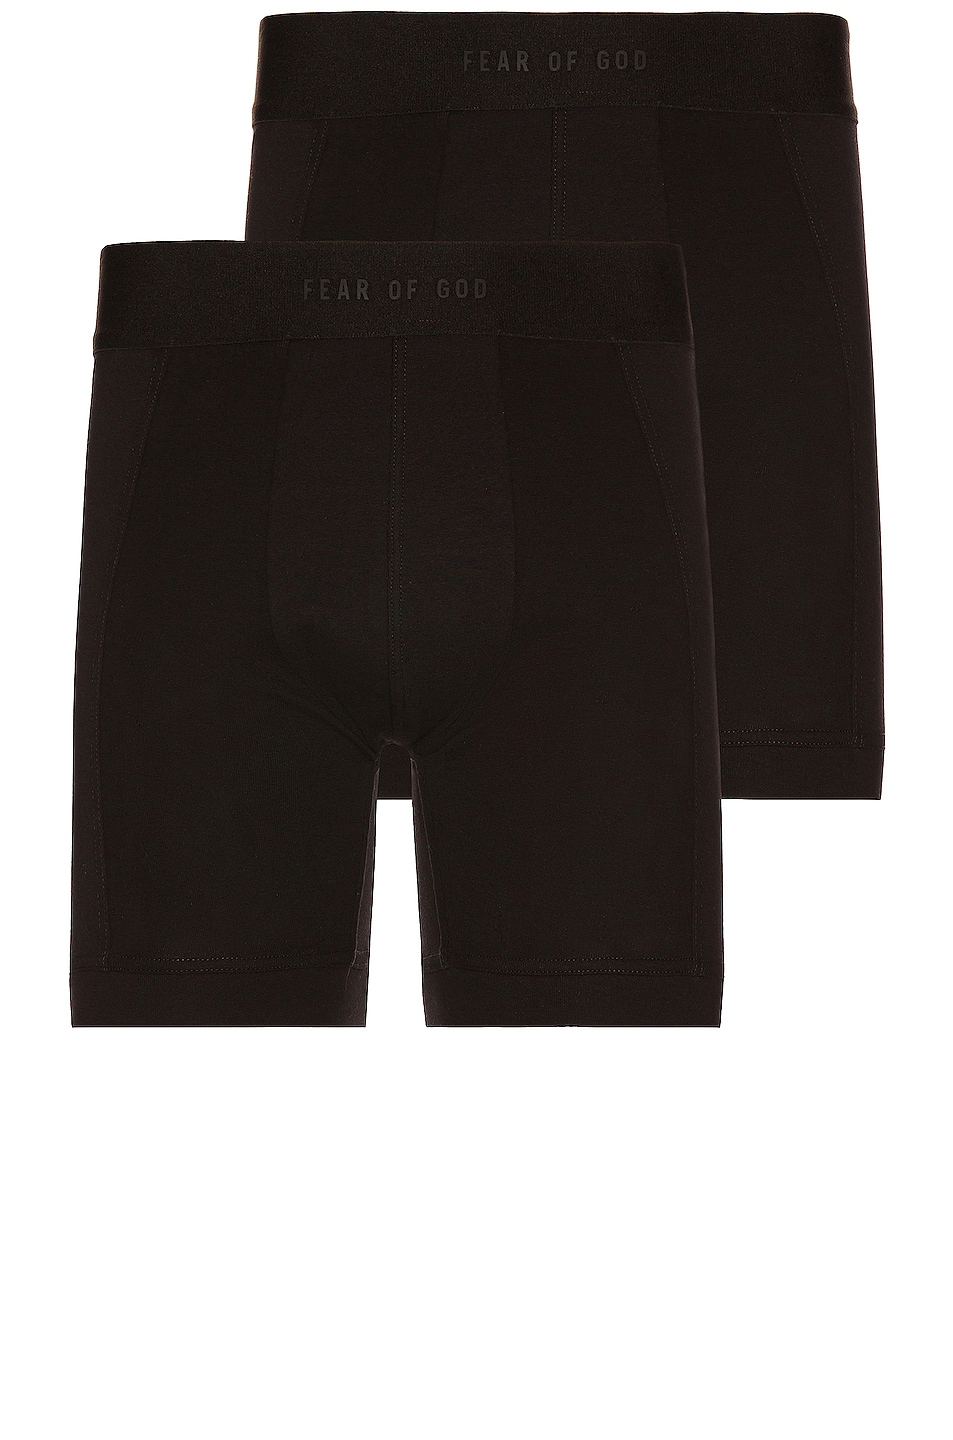 Image 1 of Fear of God 2 Pack Boxer Brief in Black